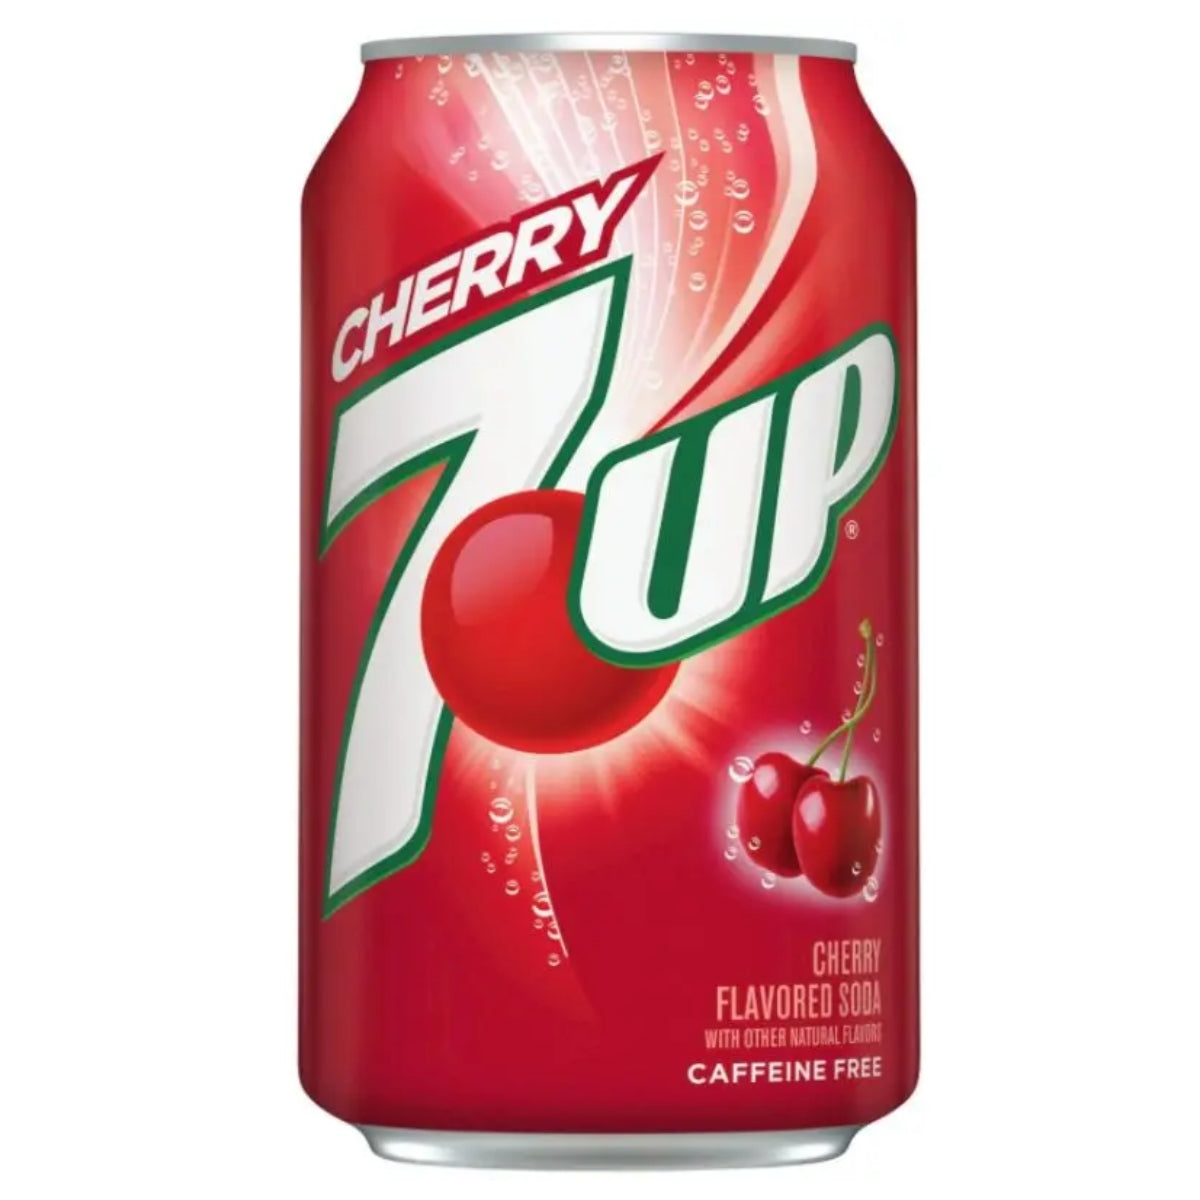 A can of 7up - Cherry - 330ml on a white background.